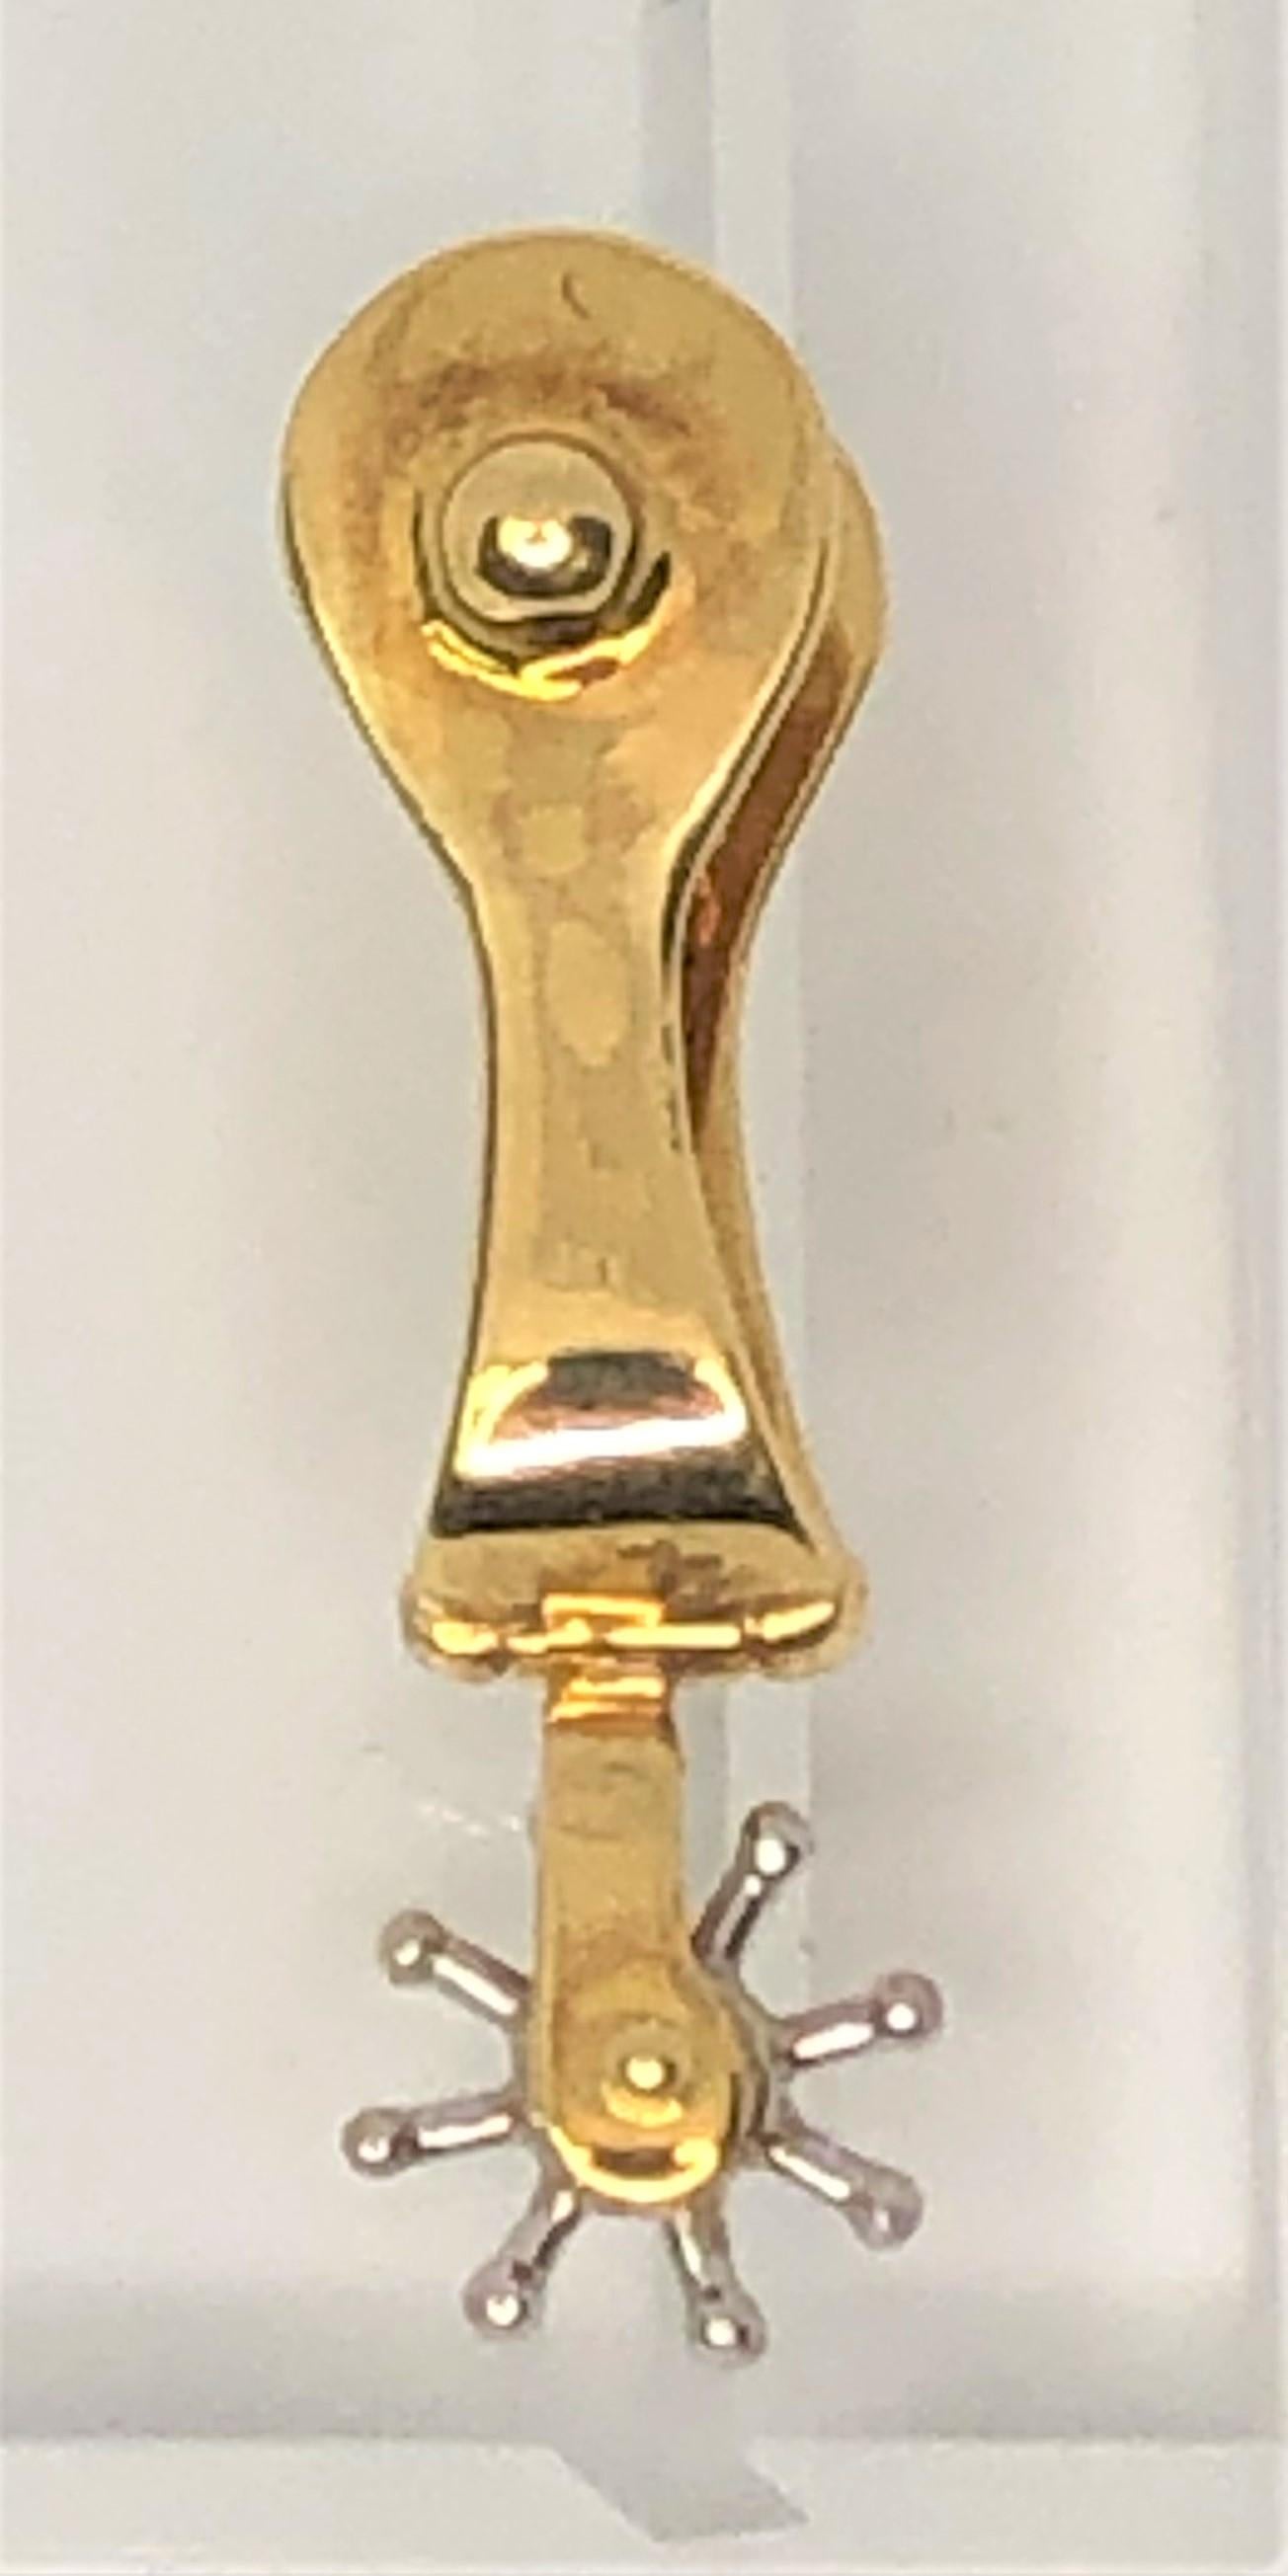 By designer Sal Praschnik, these gold spur cufflinks are a one-of-a-kind, must have item!
18 karat yellow and white gold spurs
Spurs spin
Approximately 1.5 inches X .75 inches
Stamped 